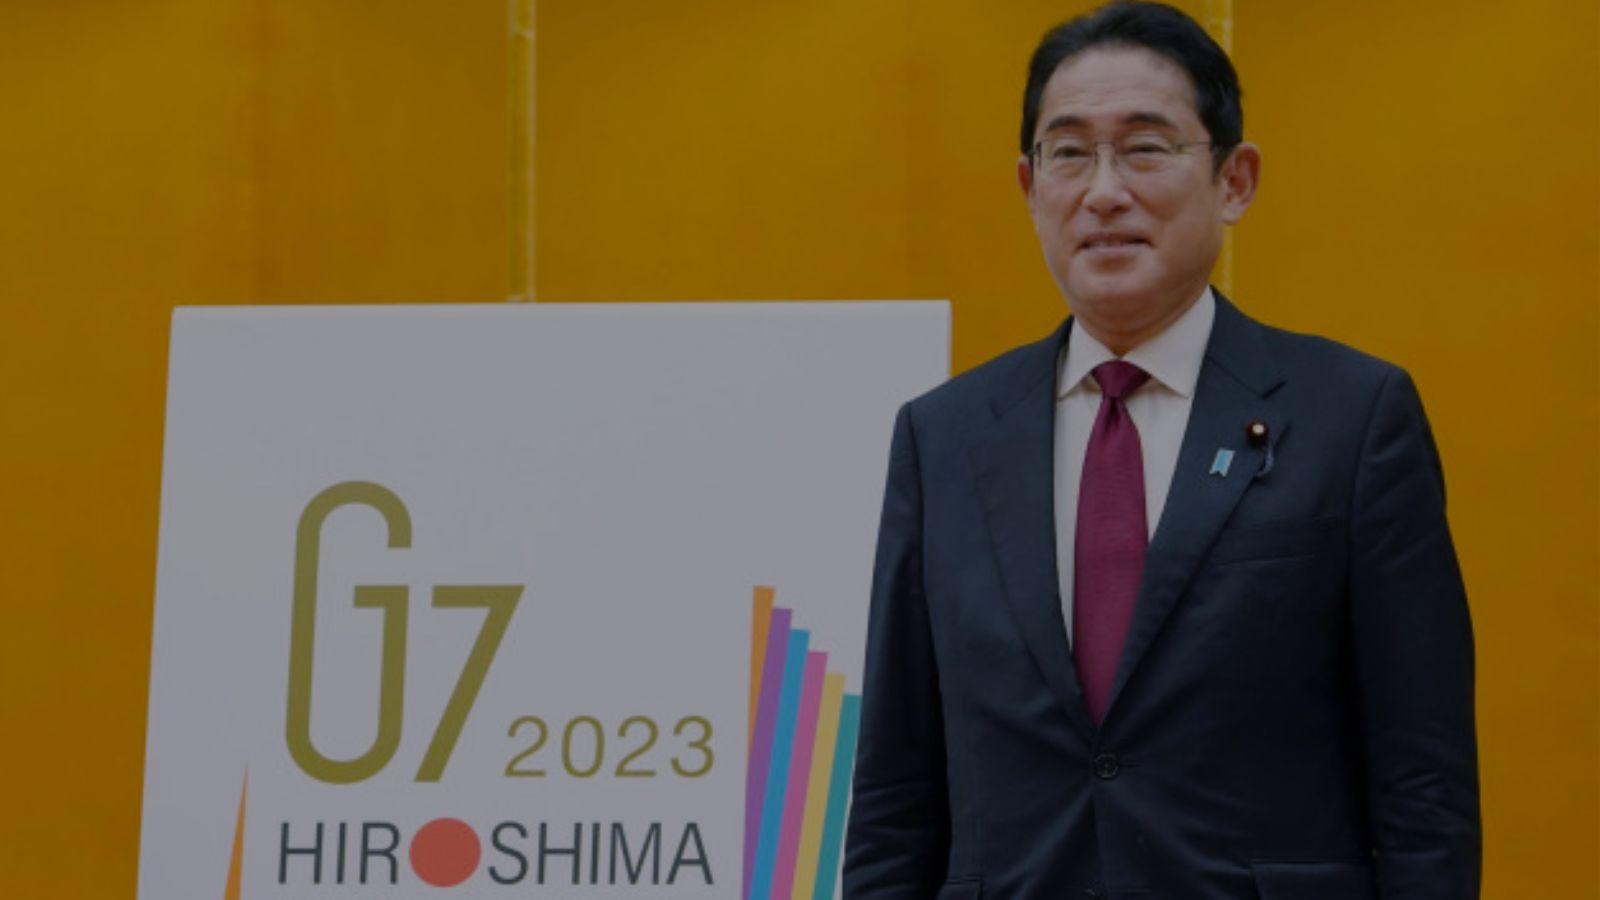 The Significance of G7 2023: Priorities and Their Strategic Importance